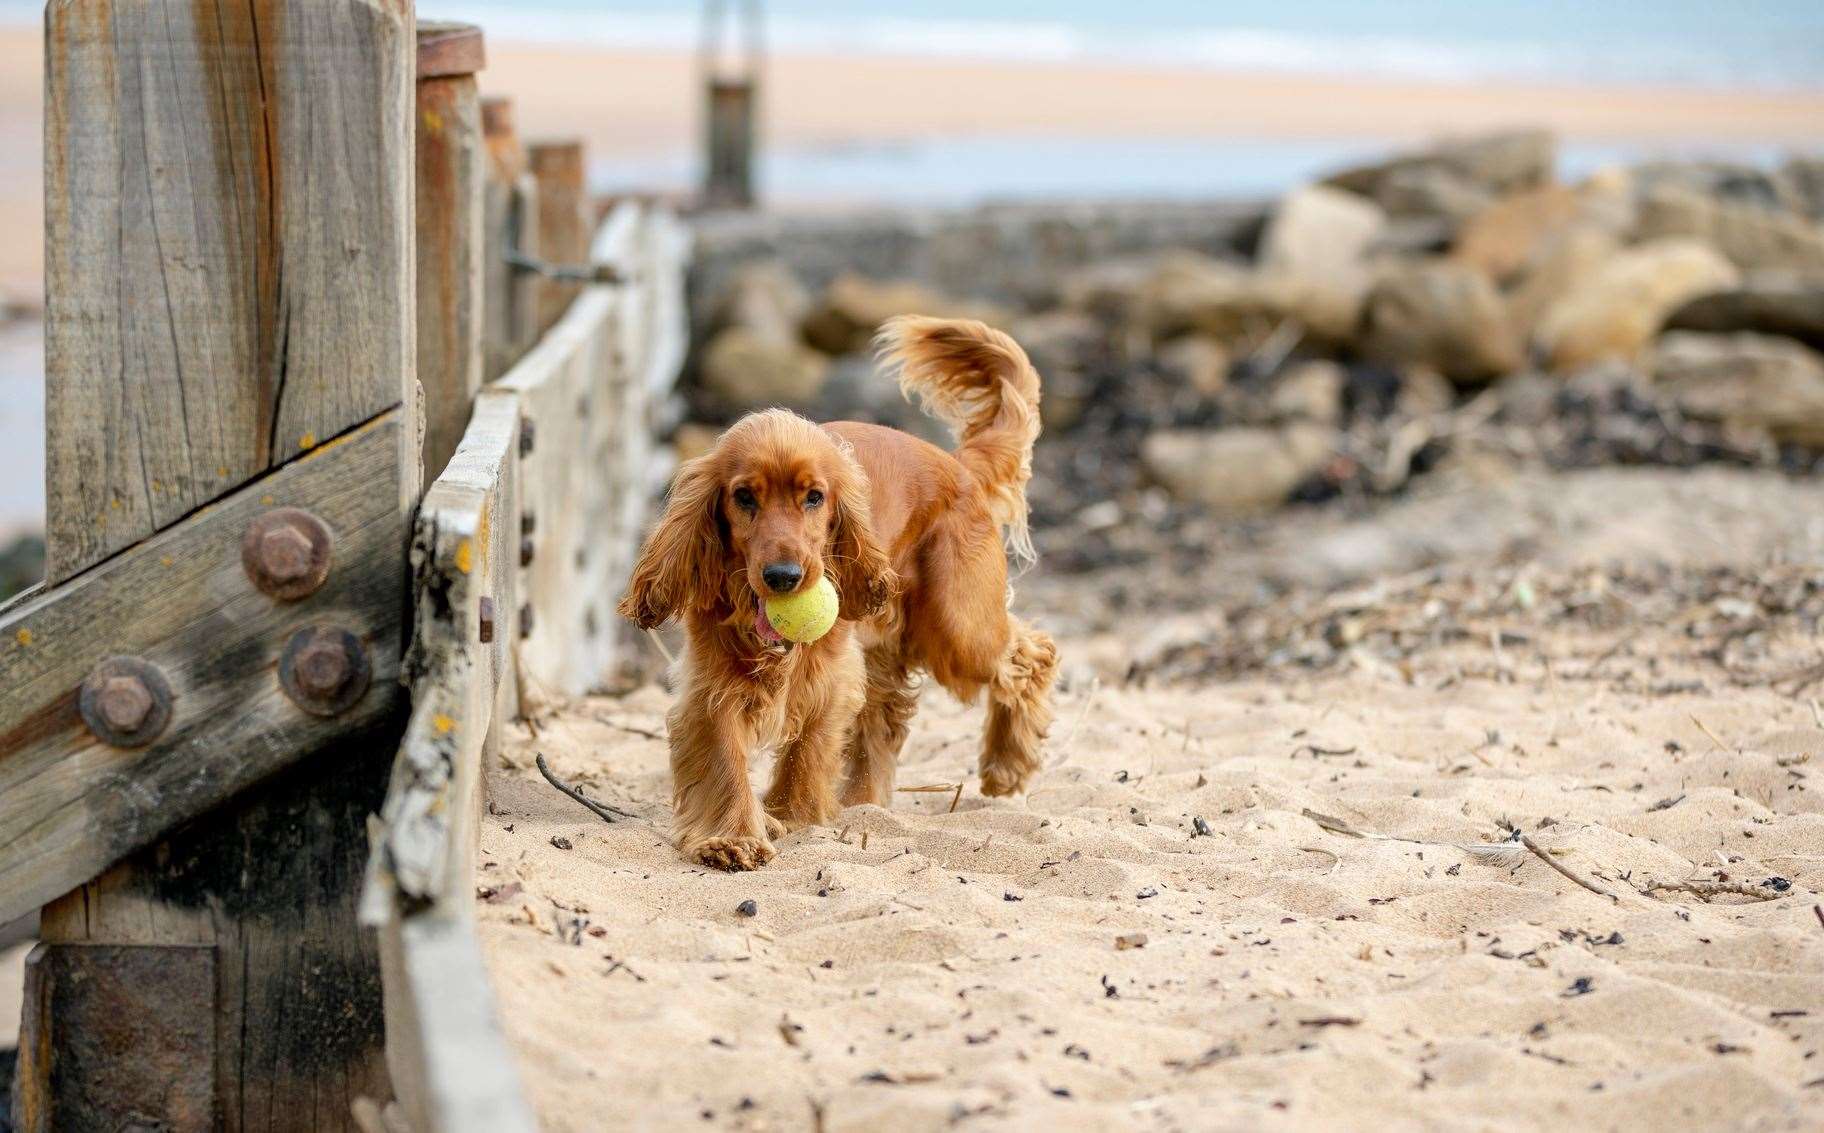 Dogs are often only permitted on certain beaches in the summer months. Image: iStock.